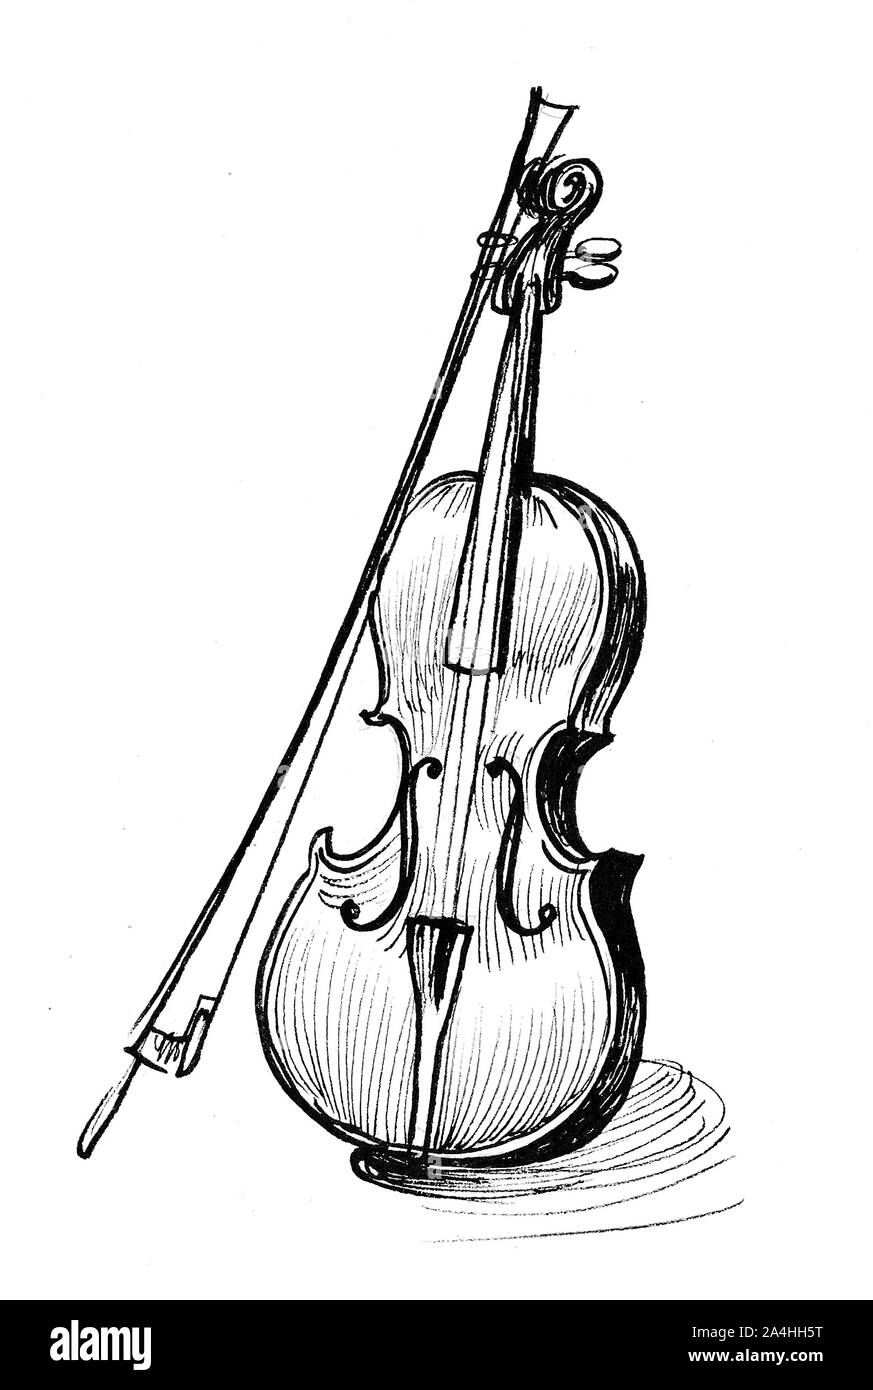 Violin. Musical instrument. Ink black and white drawing Stock Photo - Alamy